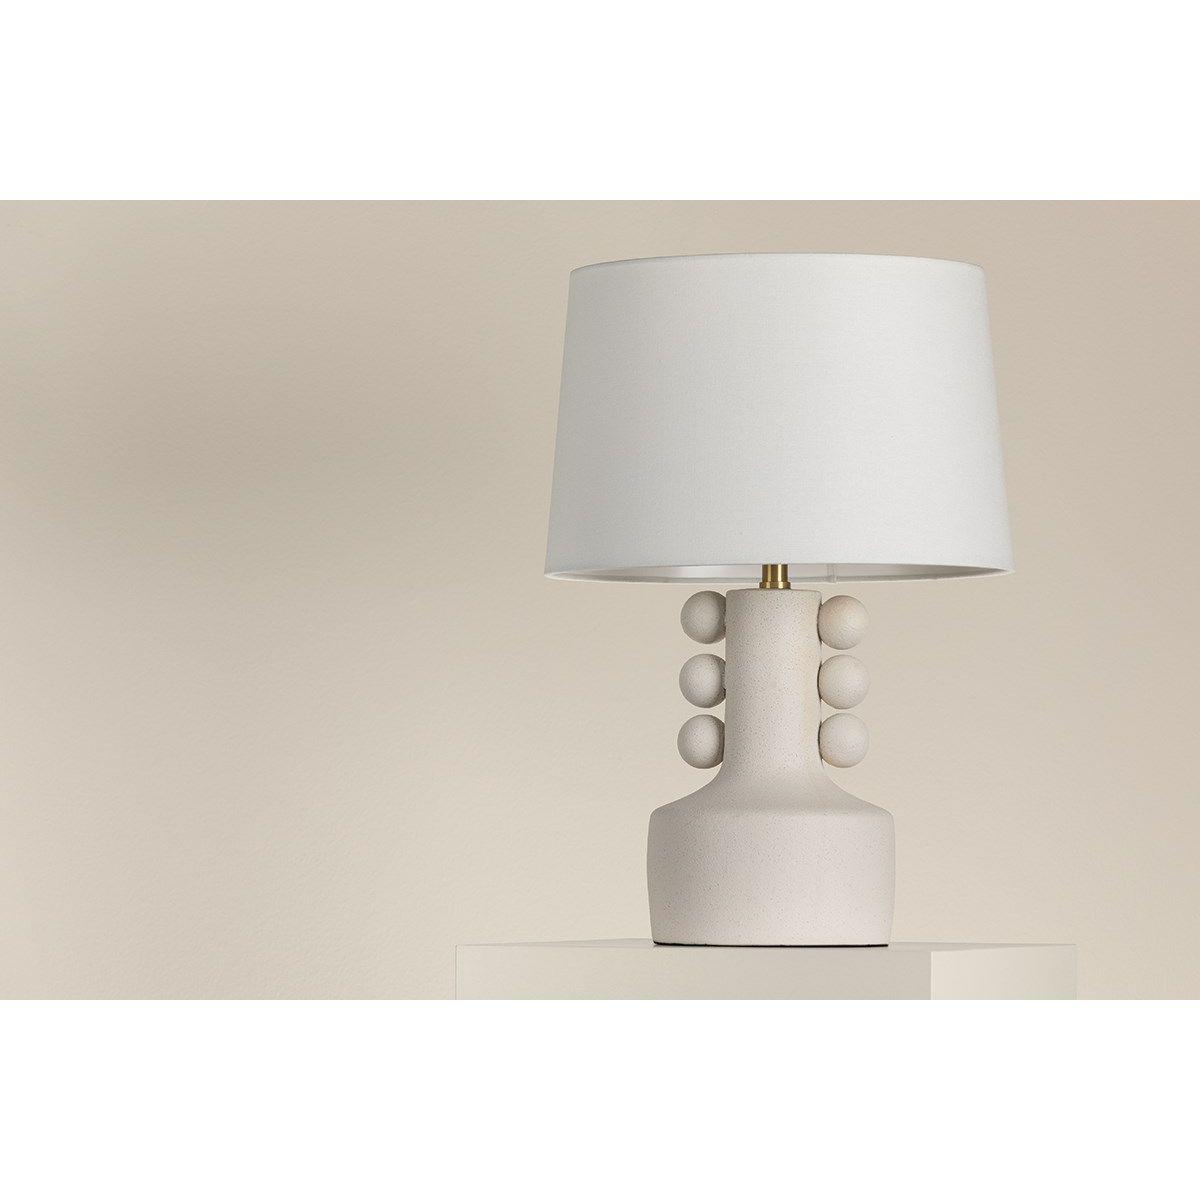 Amalia Table Lamp Ceramic White Speck with Aged Brass Accents